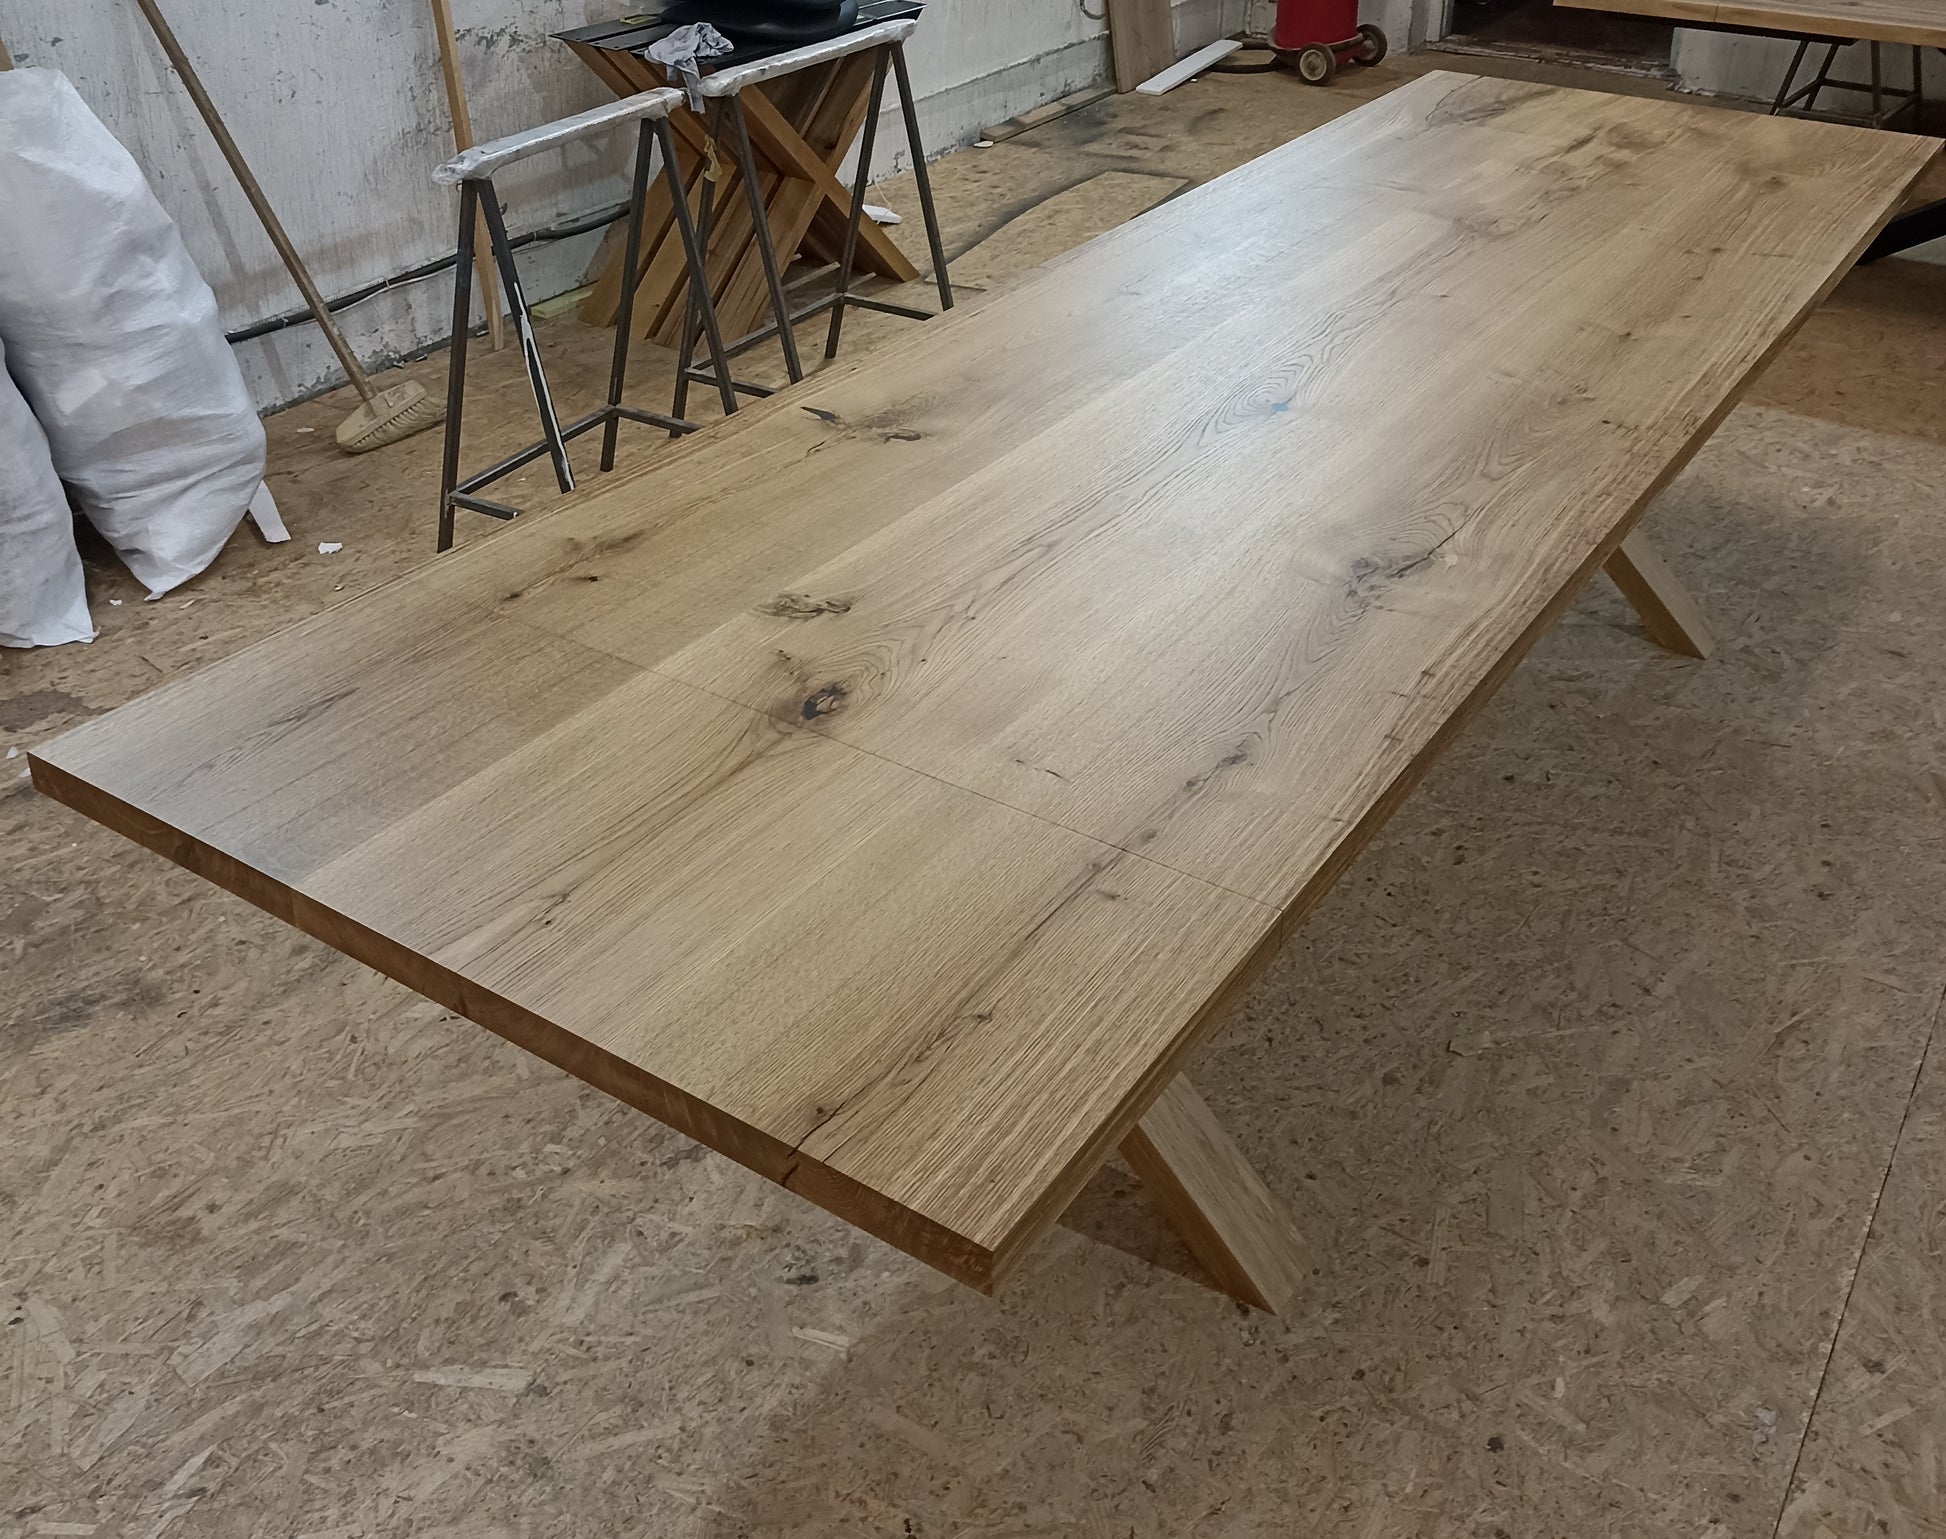 Oak Dining Table Extendable 240x100 cm - 240 x 100cm / 10 Seater / Extendable +40cm on each side 240 x 100cm / 10 Seater / Extendable +40cm on each side #MWS Options 333503684 by S10Home